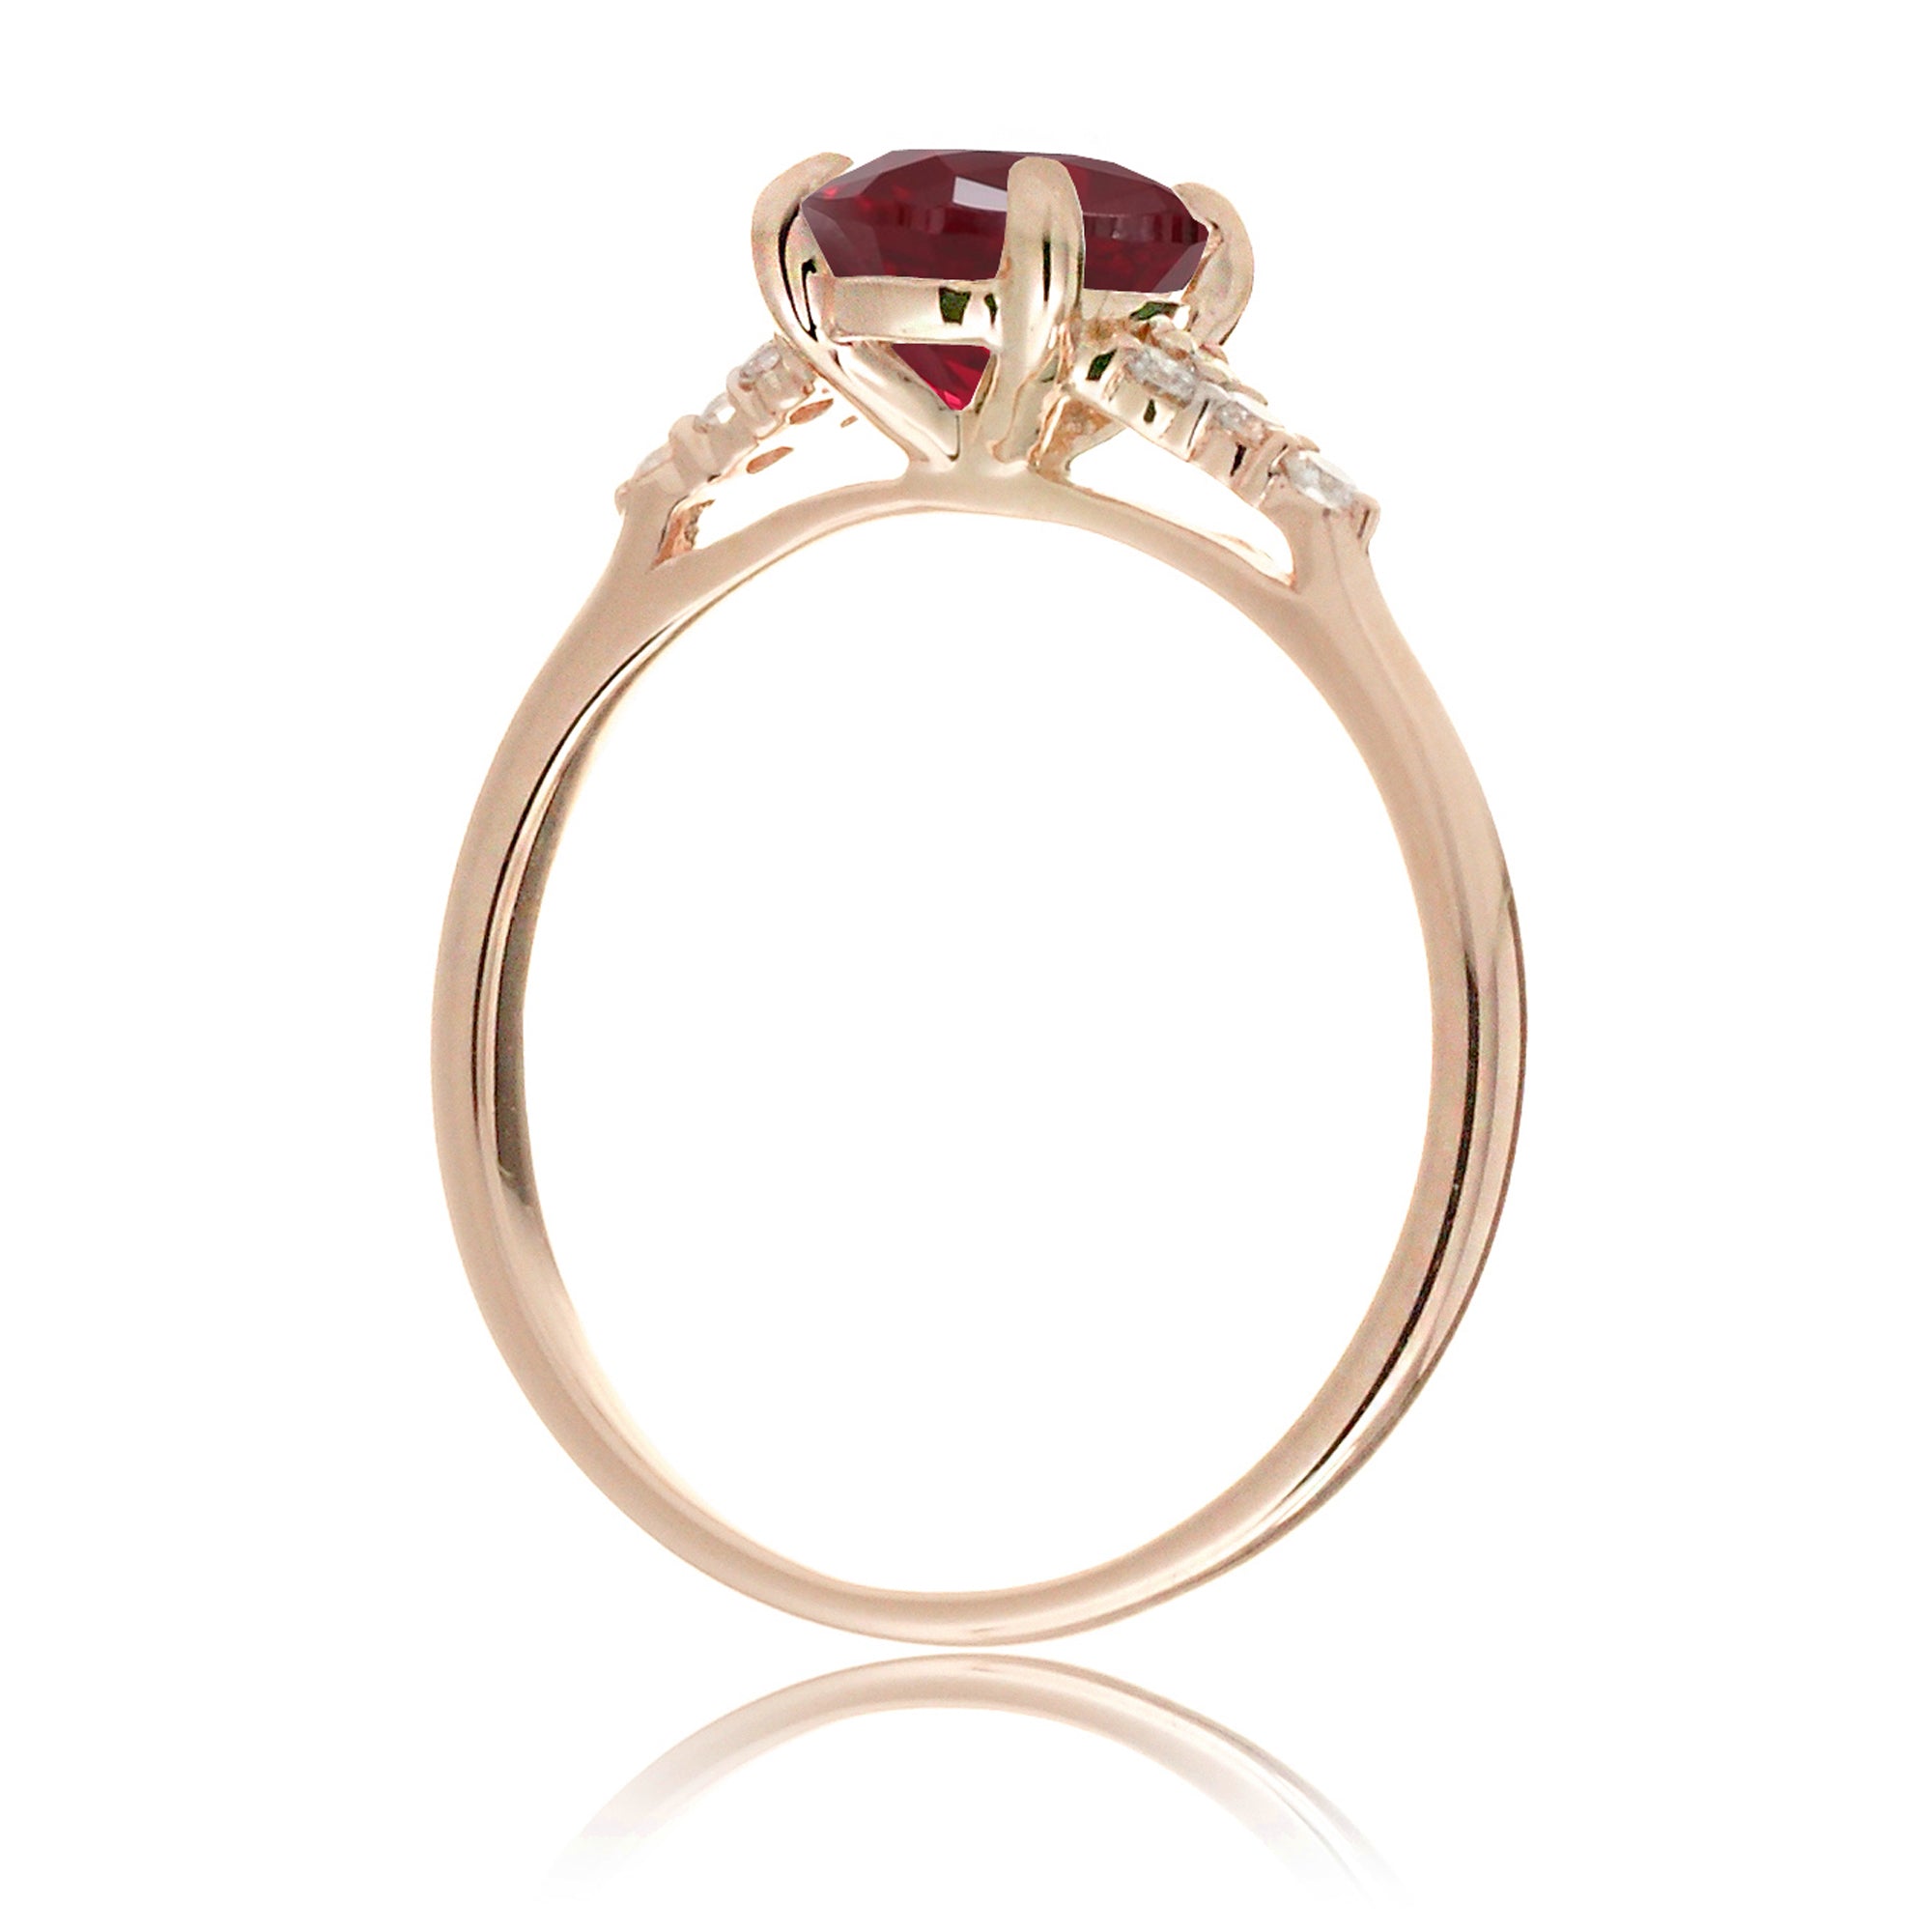 Pear cut ruby and diamond engagement ring in rose gold - the Chloe lab-grown